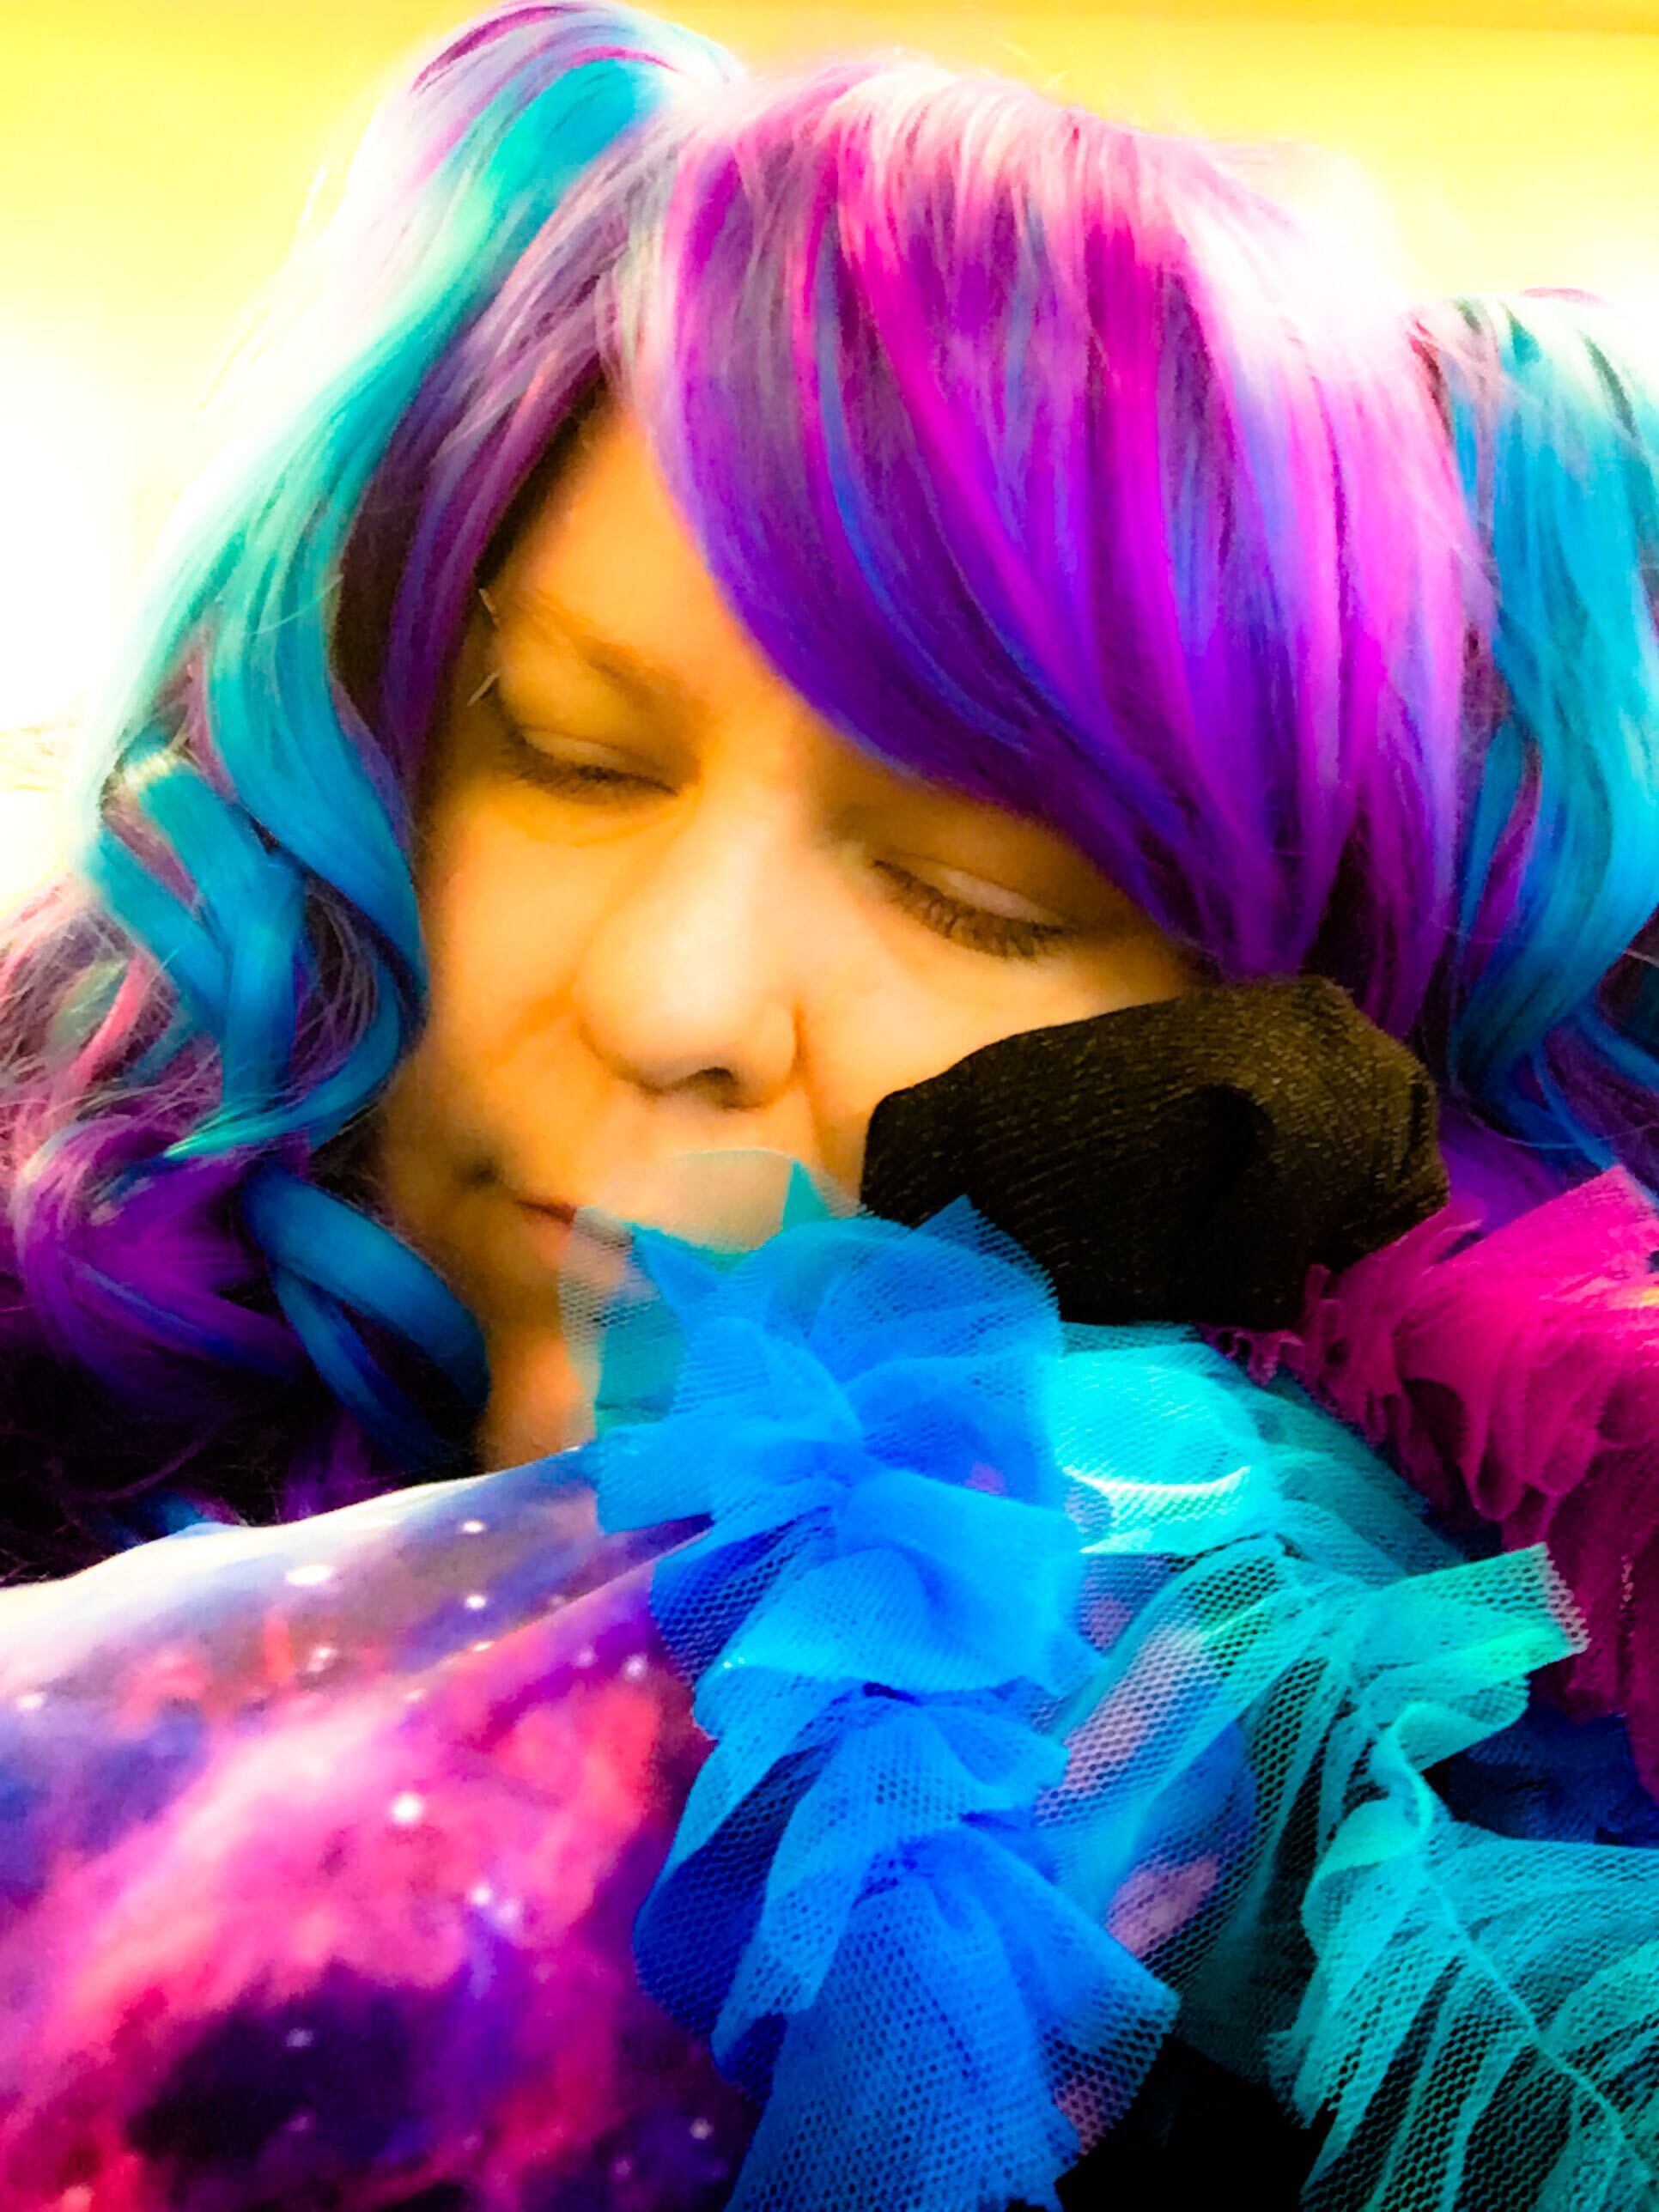 A person in a long blue and purple and pink wig resting their head on their arms, eyes closed. Their sleeves are space-patterned and a small home-made stuffed jellyfish half conceals their face.